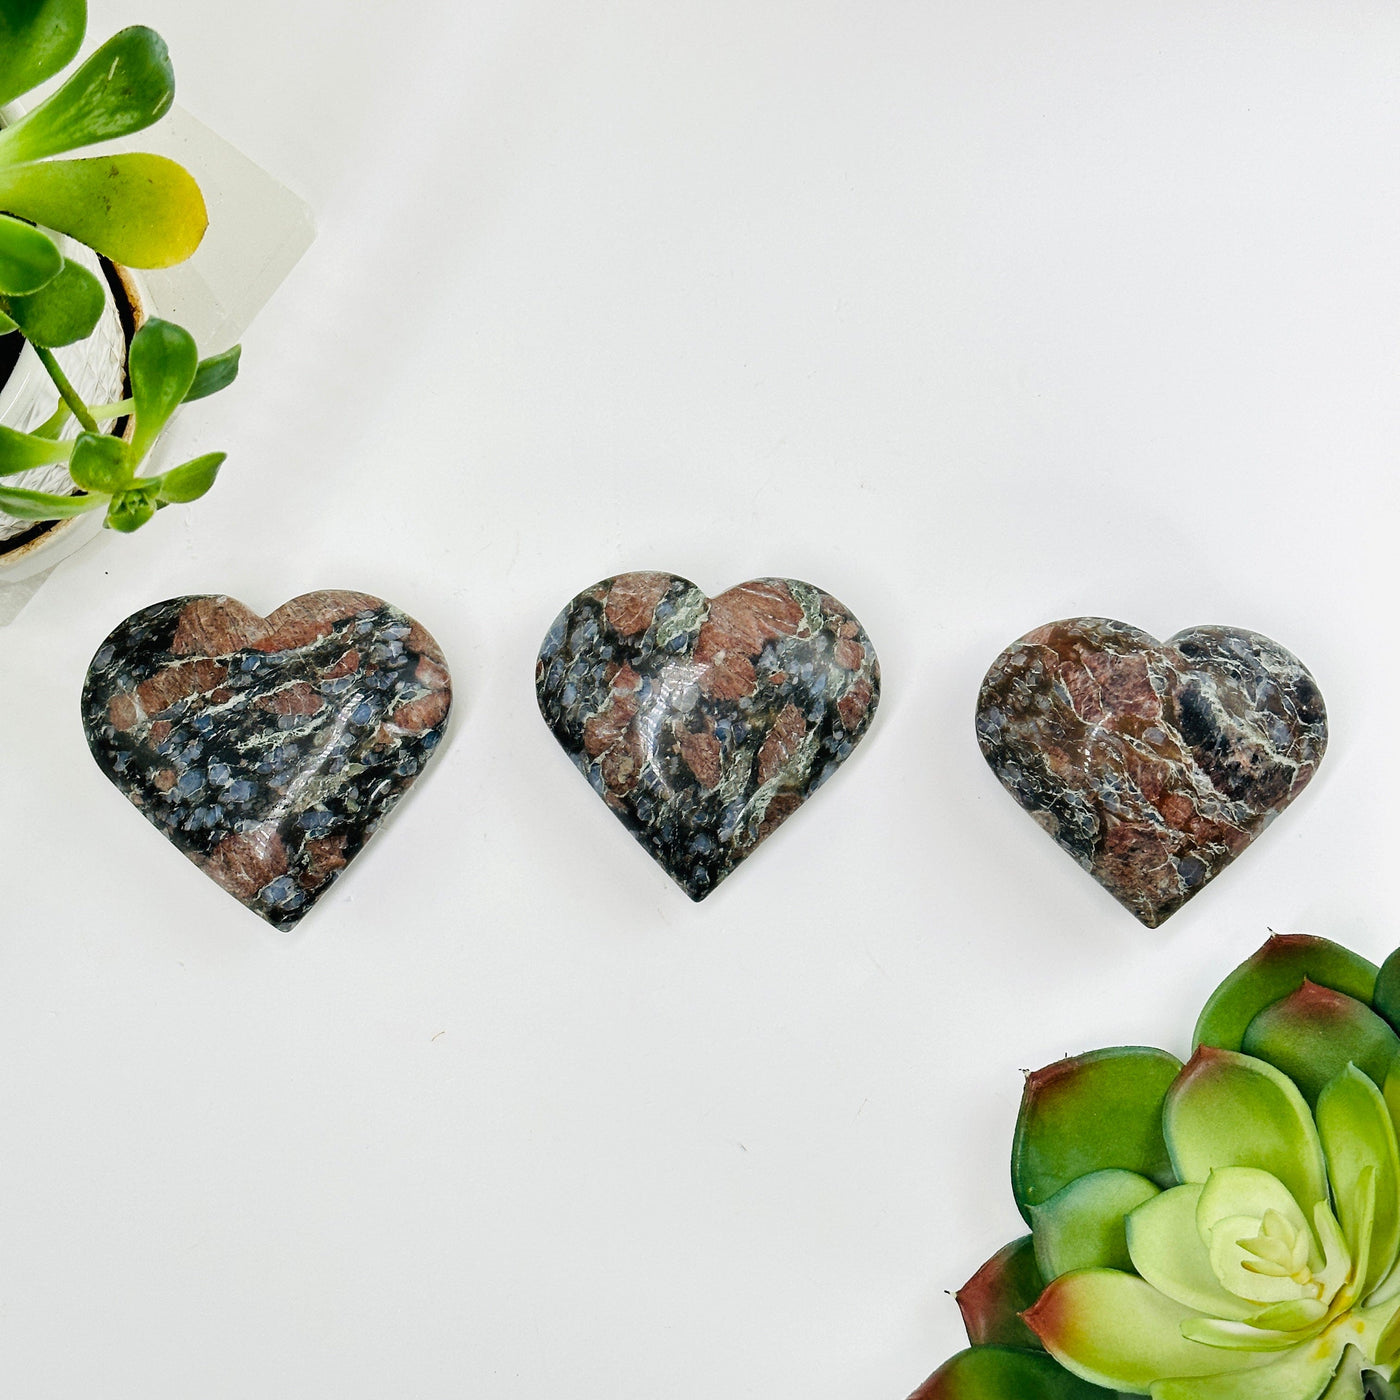 3 rhyolite hearts with decorations surrounding them